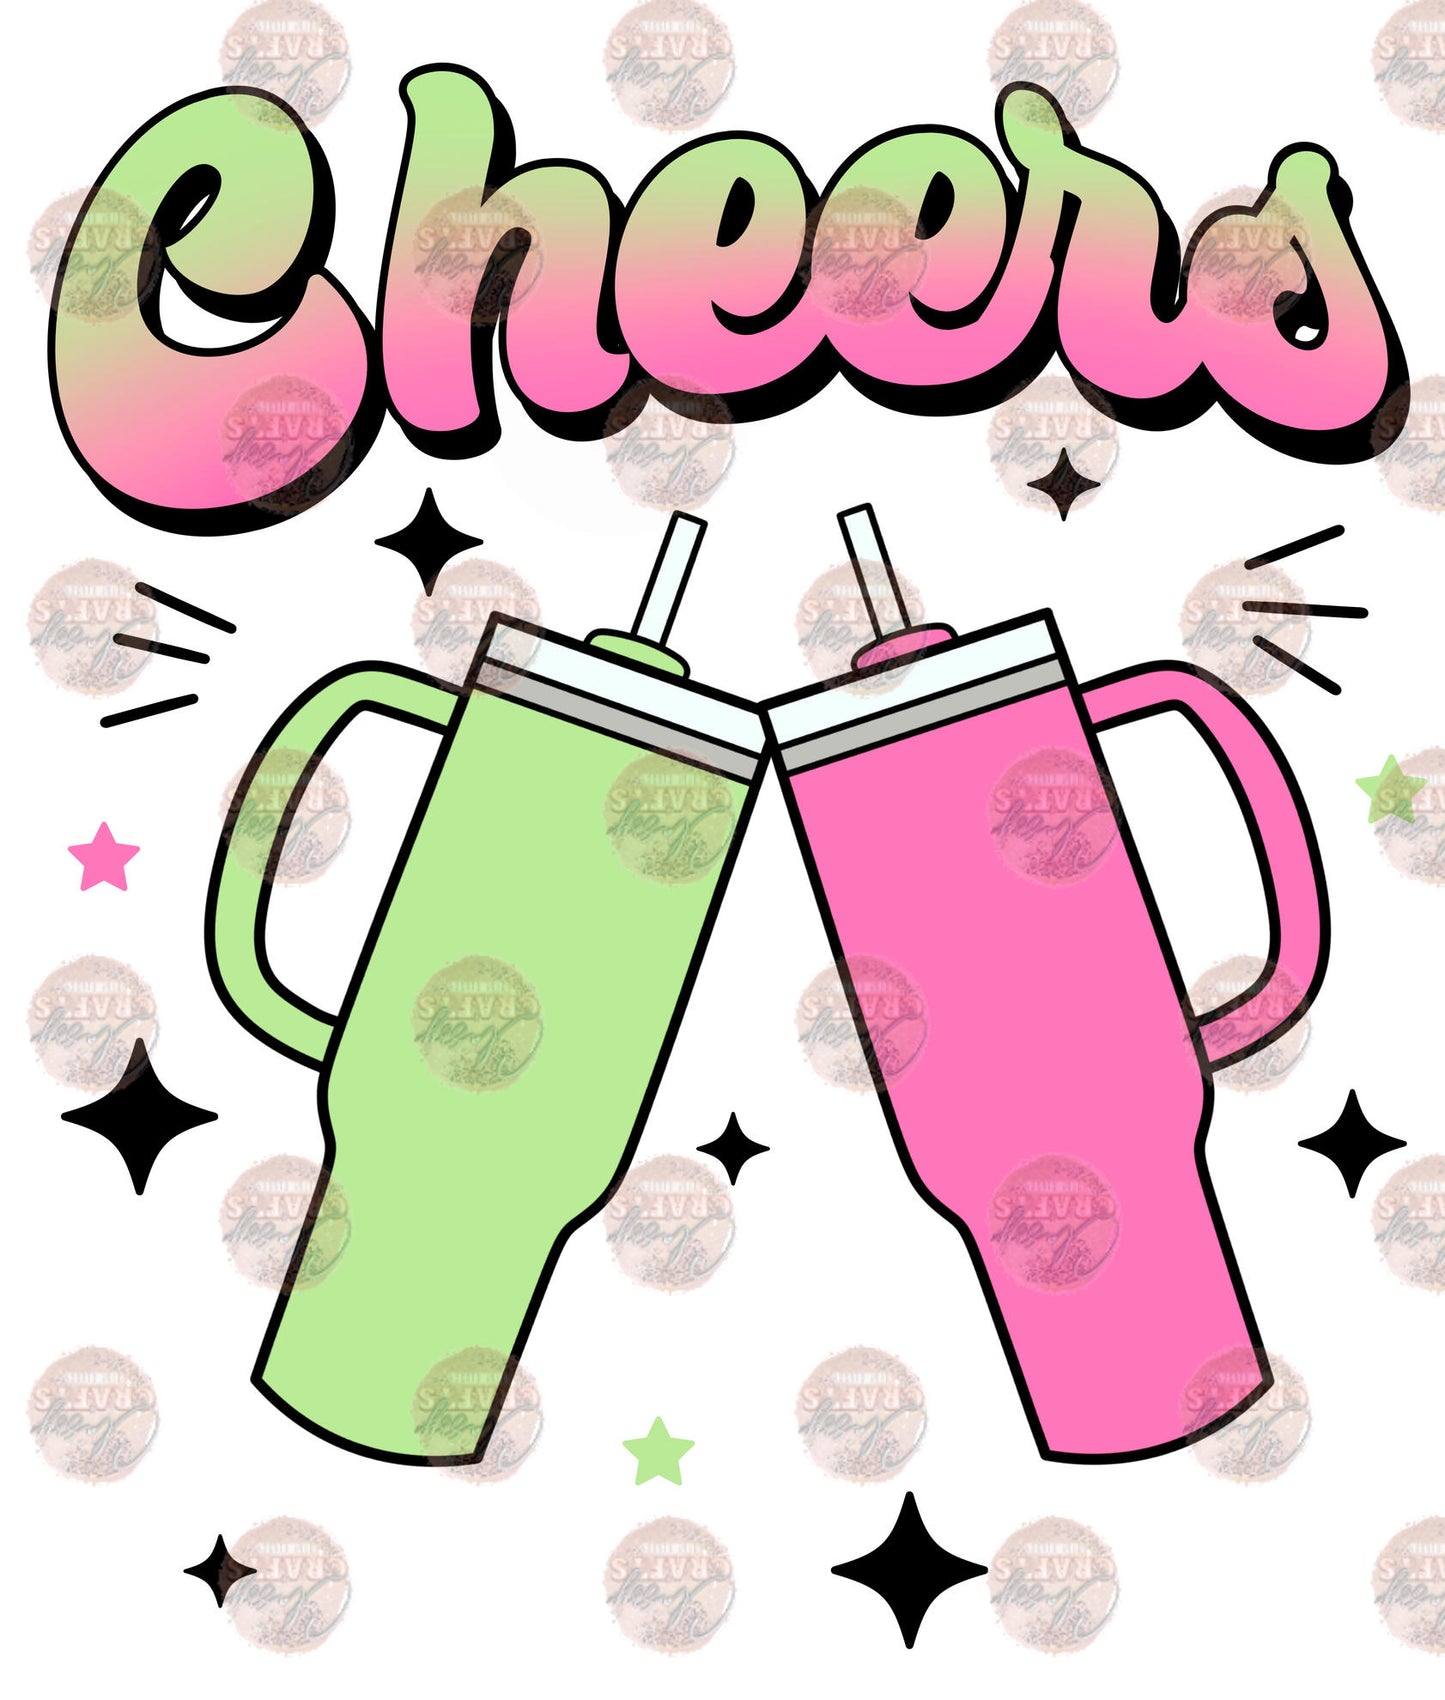 Cheers Pink and Green Transfer